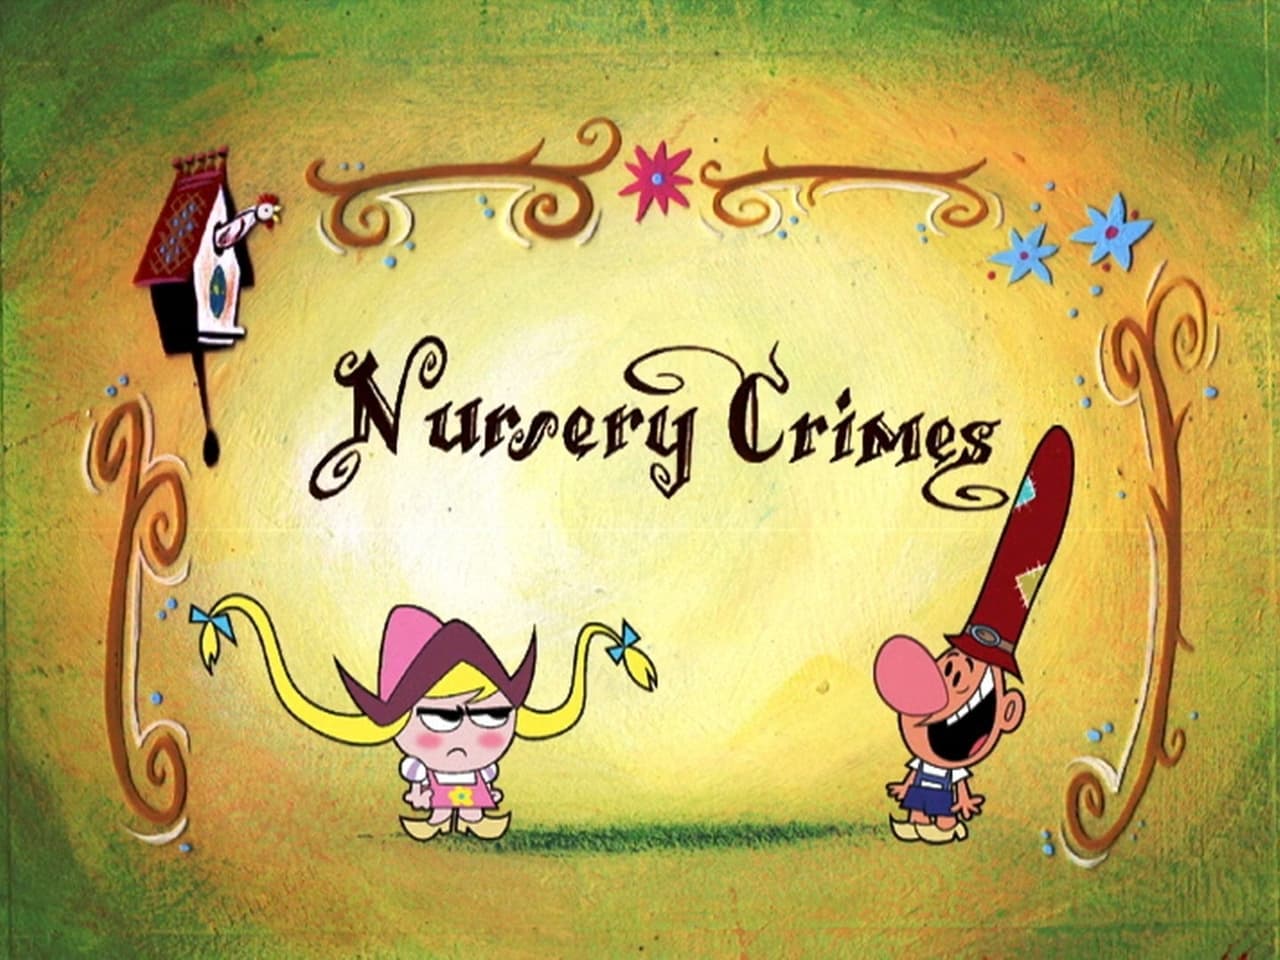 The Grim Adventures of Billy and Mandy - Season 3 Episode 10 : Nursery Crimes